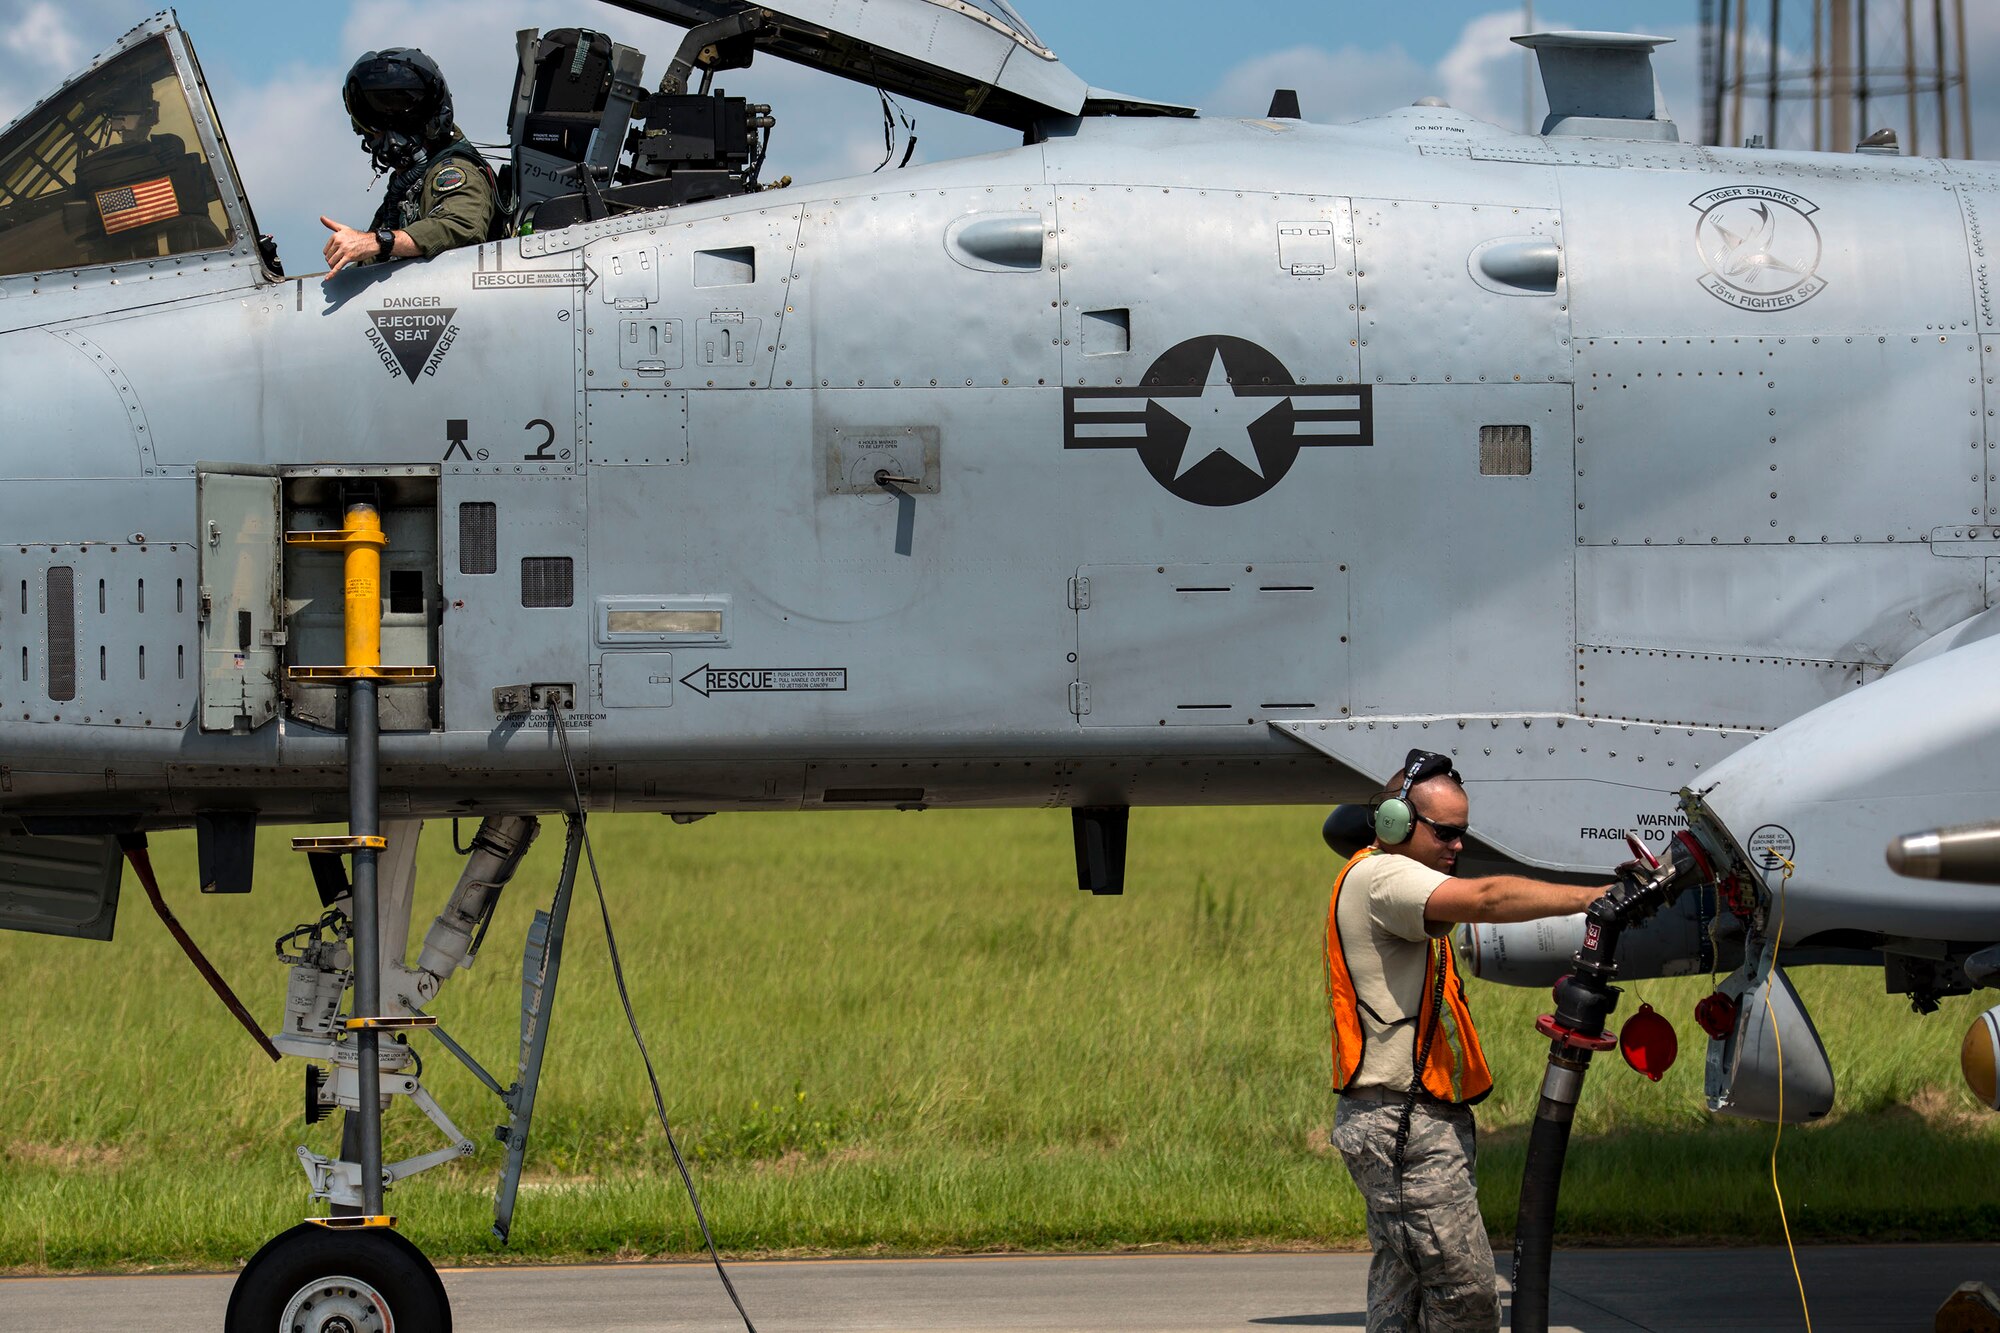 Staff Sgt. Jared Burrus, right, 476th Maintenance Squadron crew chief, flips fuel flow switches on an A-10C Thunderbolt II during a hot pit refueling, Aug. 14, 2018, at Moody Air Force Base, Ga. Members of the 23d Logistics Readiness Squadron preposition fueling trucks to allow aircraft to refuel without needing to shut down. This style of refueling is used to eliminate the need for additional maintenance procedures and to extend pilots’ training time per flight which improves operations tempo. (U.S. Air Force photo by Airman 1st Class Erick Requadt)